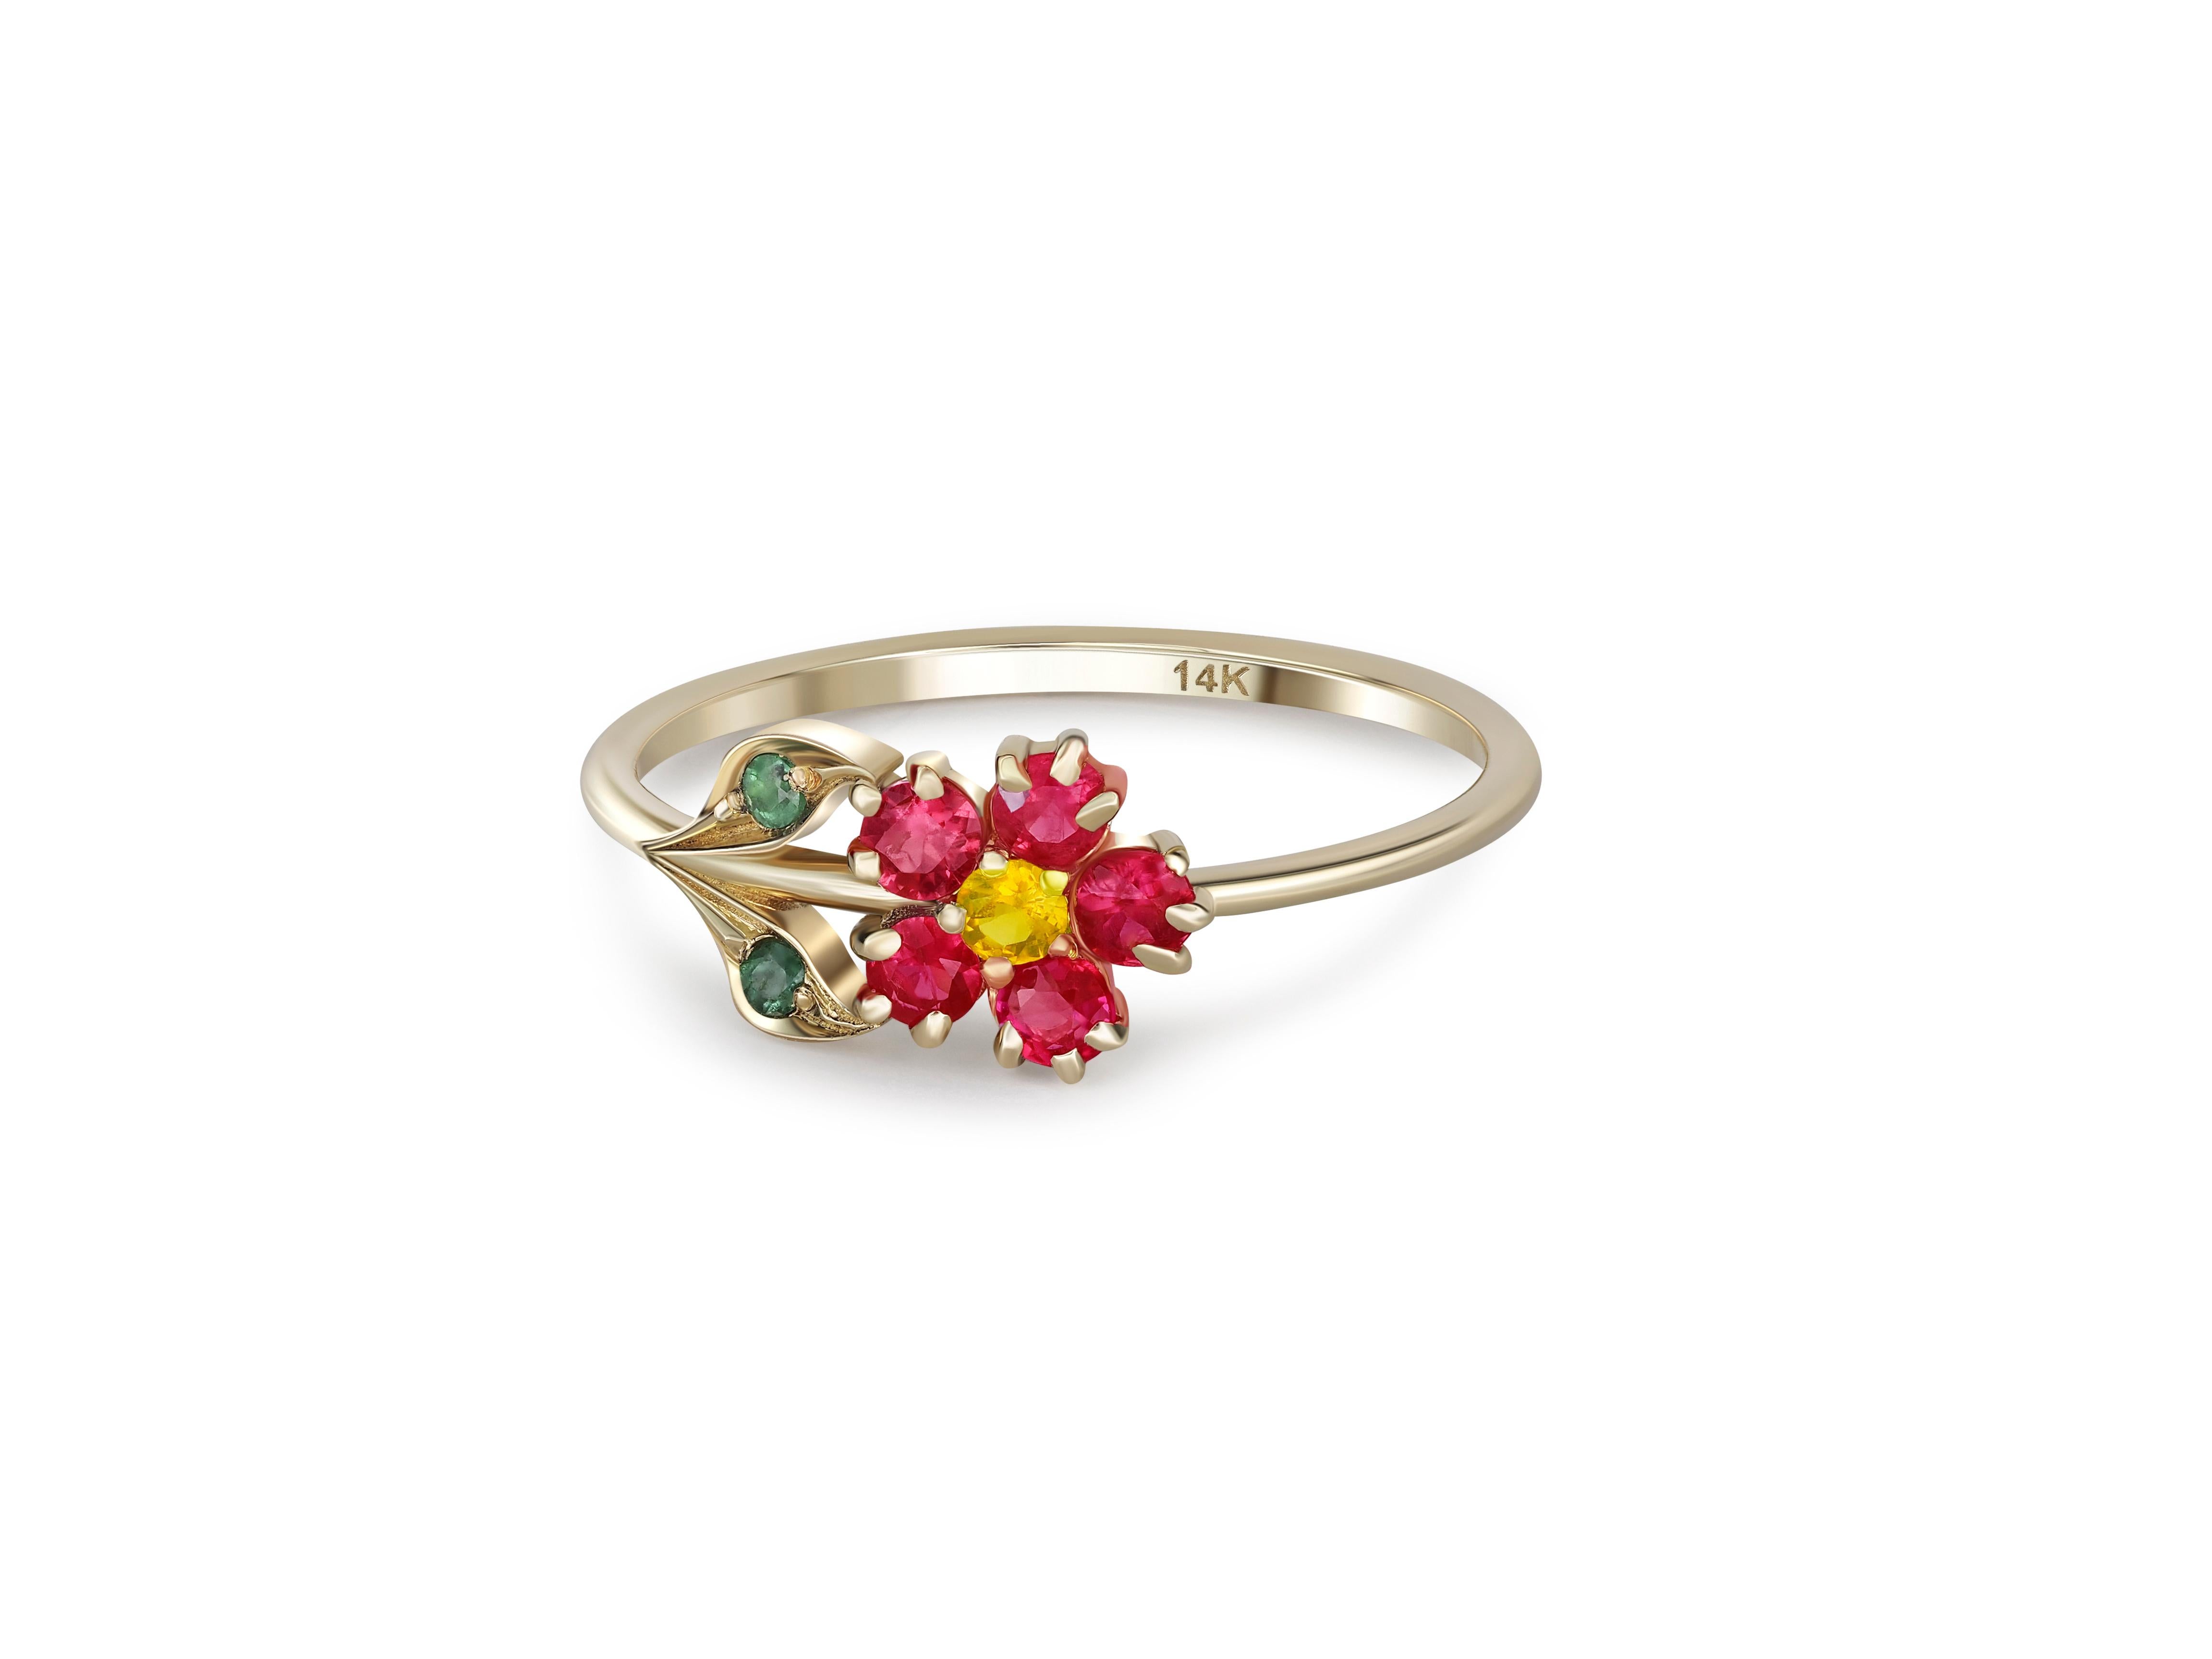 Flower Ring in 14 Karat Gold, Sapphire, Garnet and Chrome Diopsides Ring.  For Sale 6